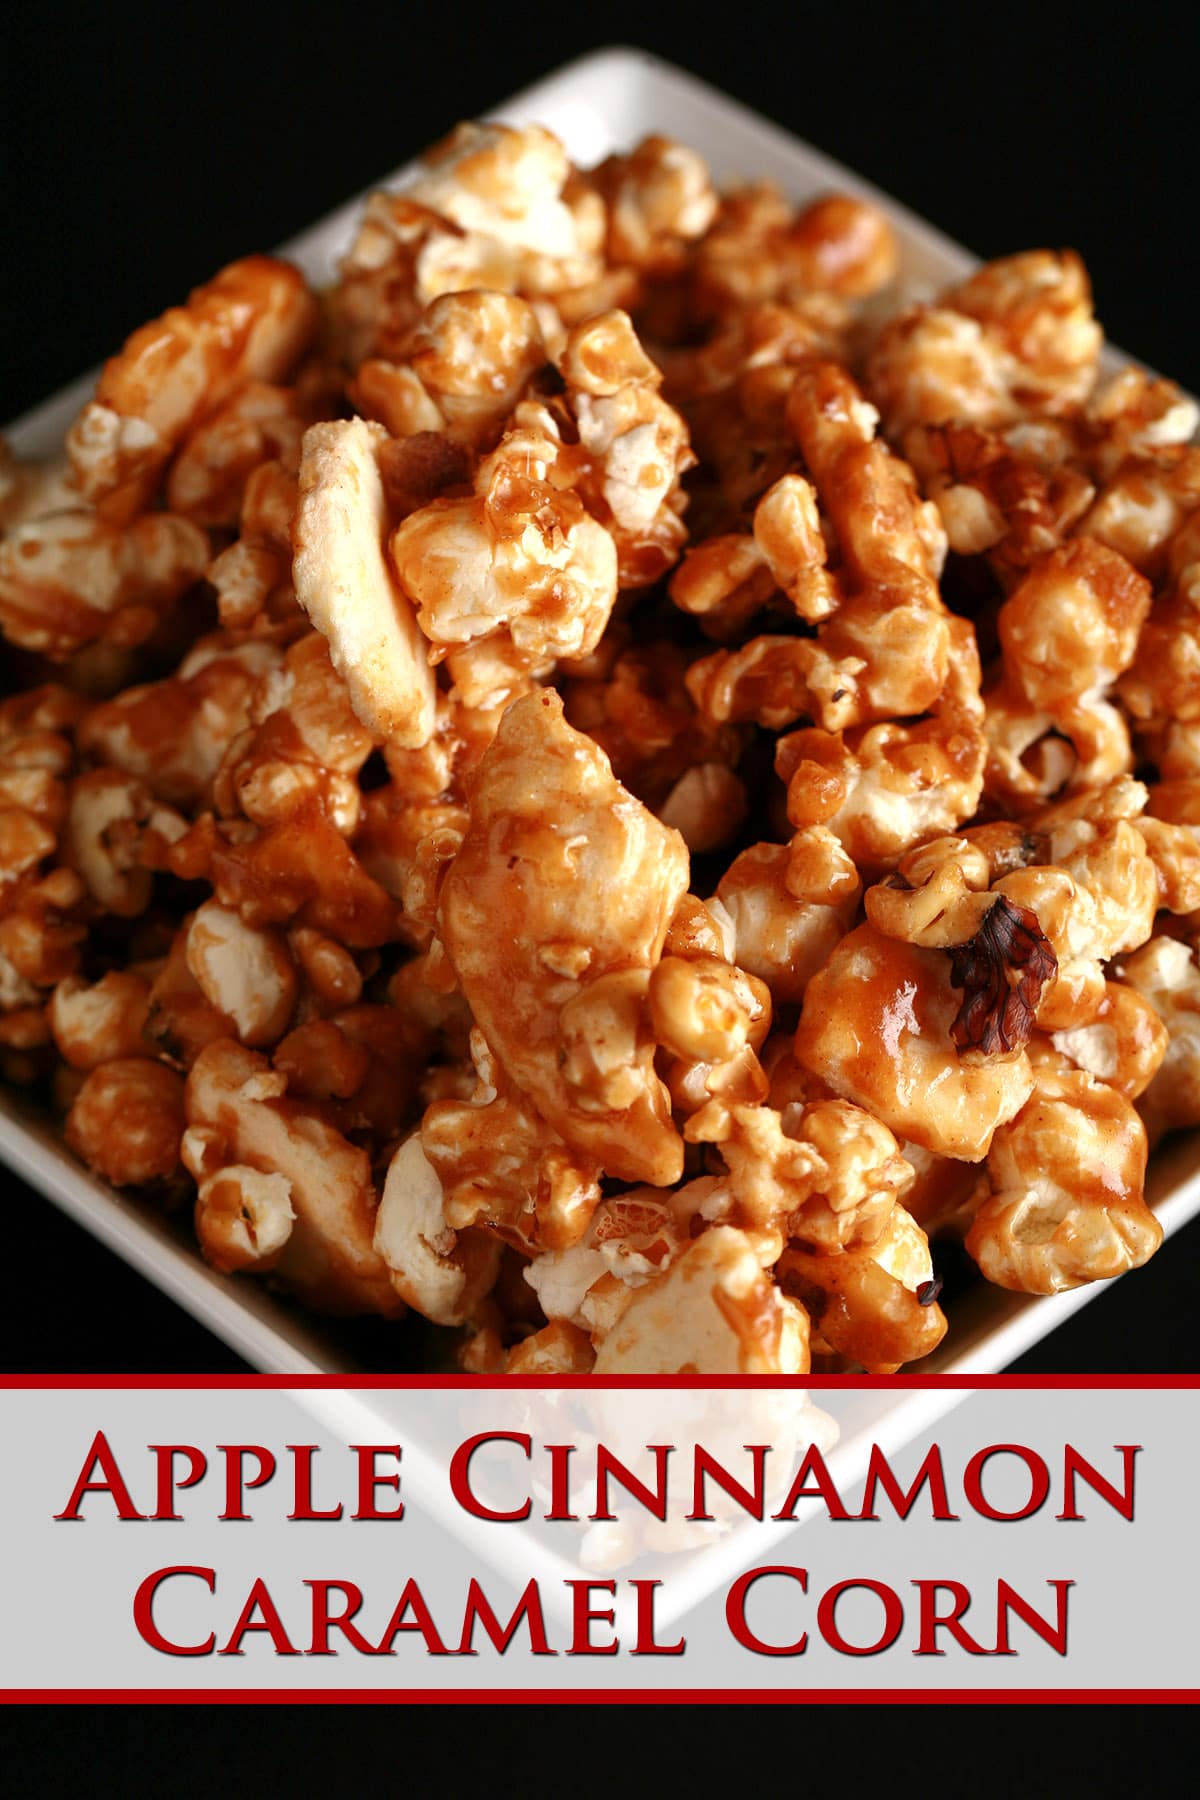 A close up view of a bowl of apple cinnamon caramel popcorn.